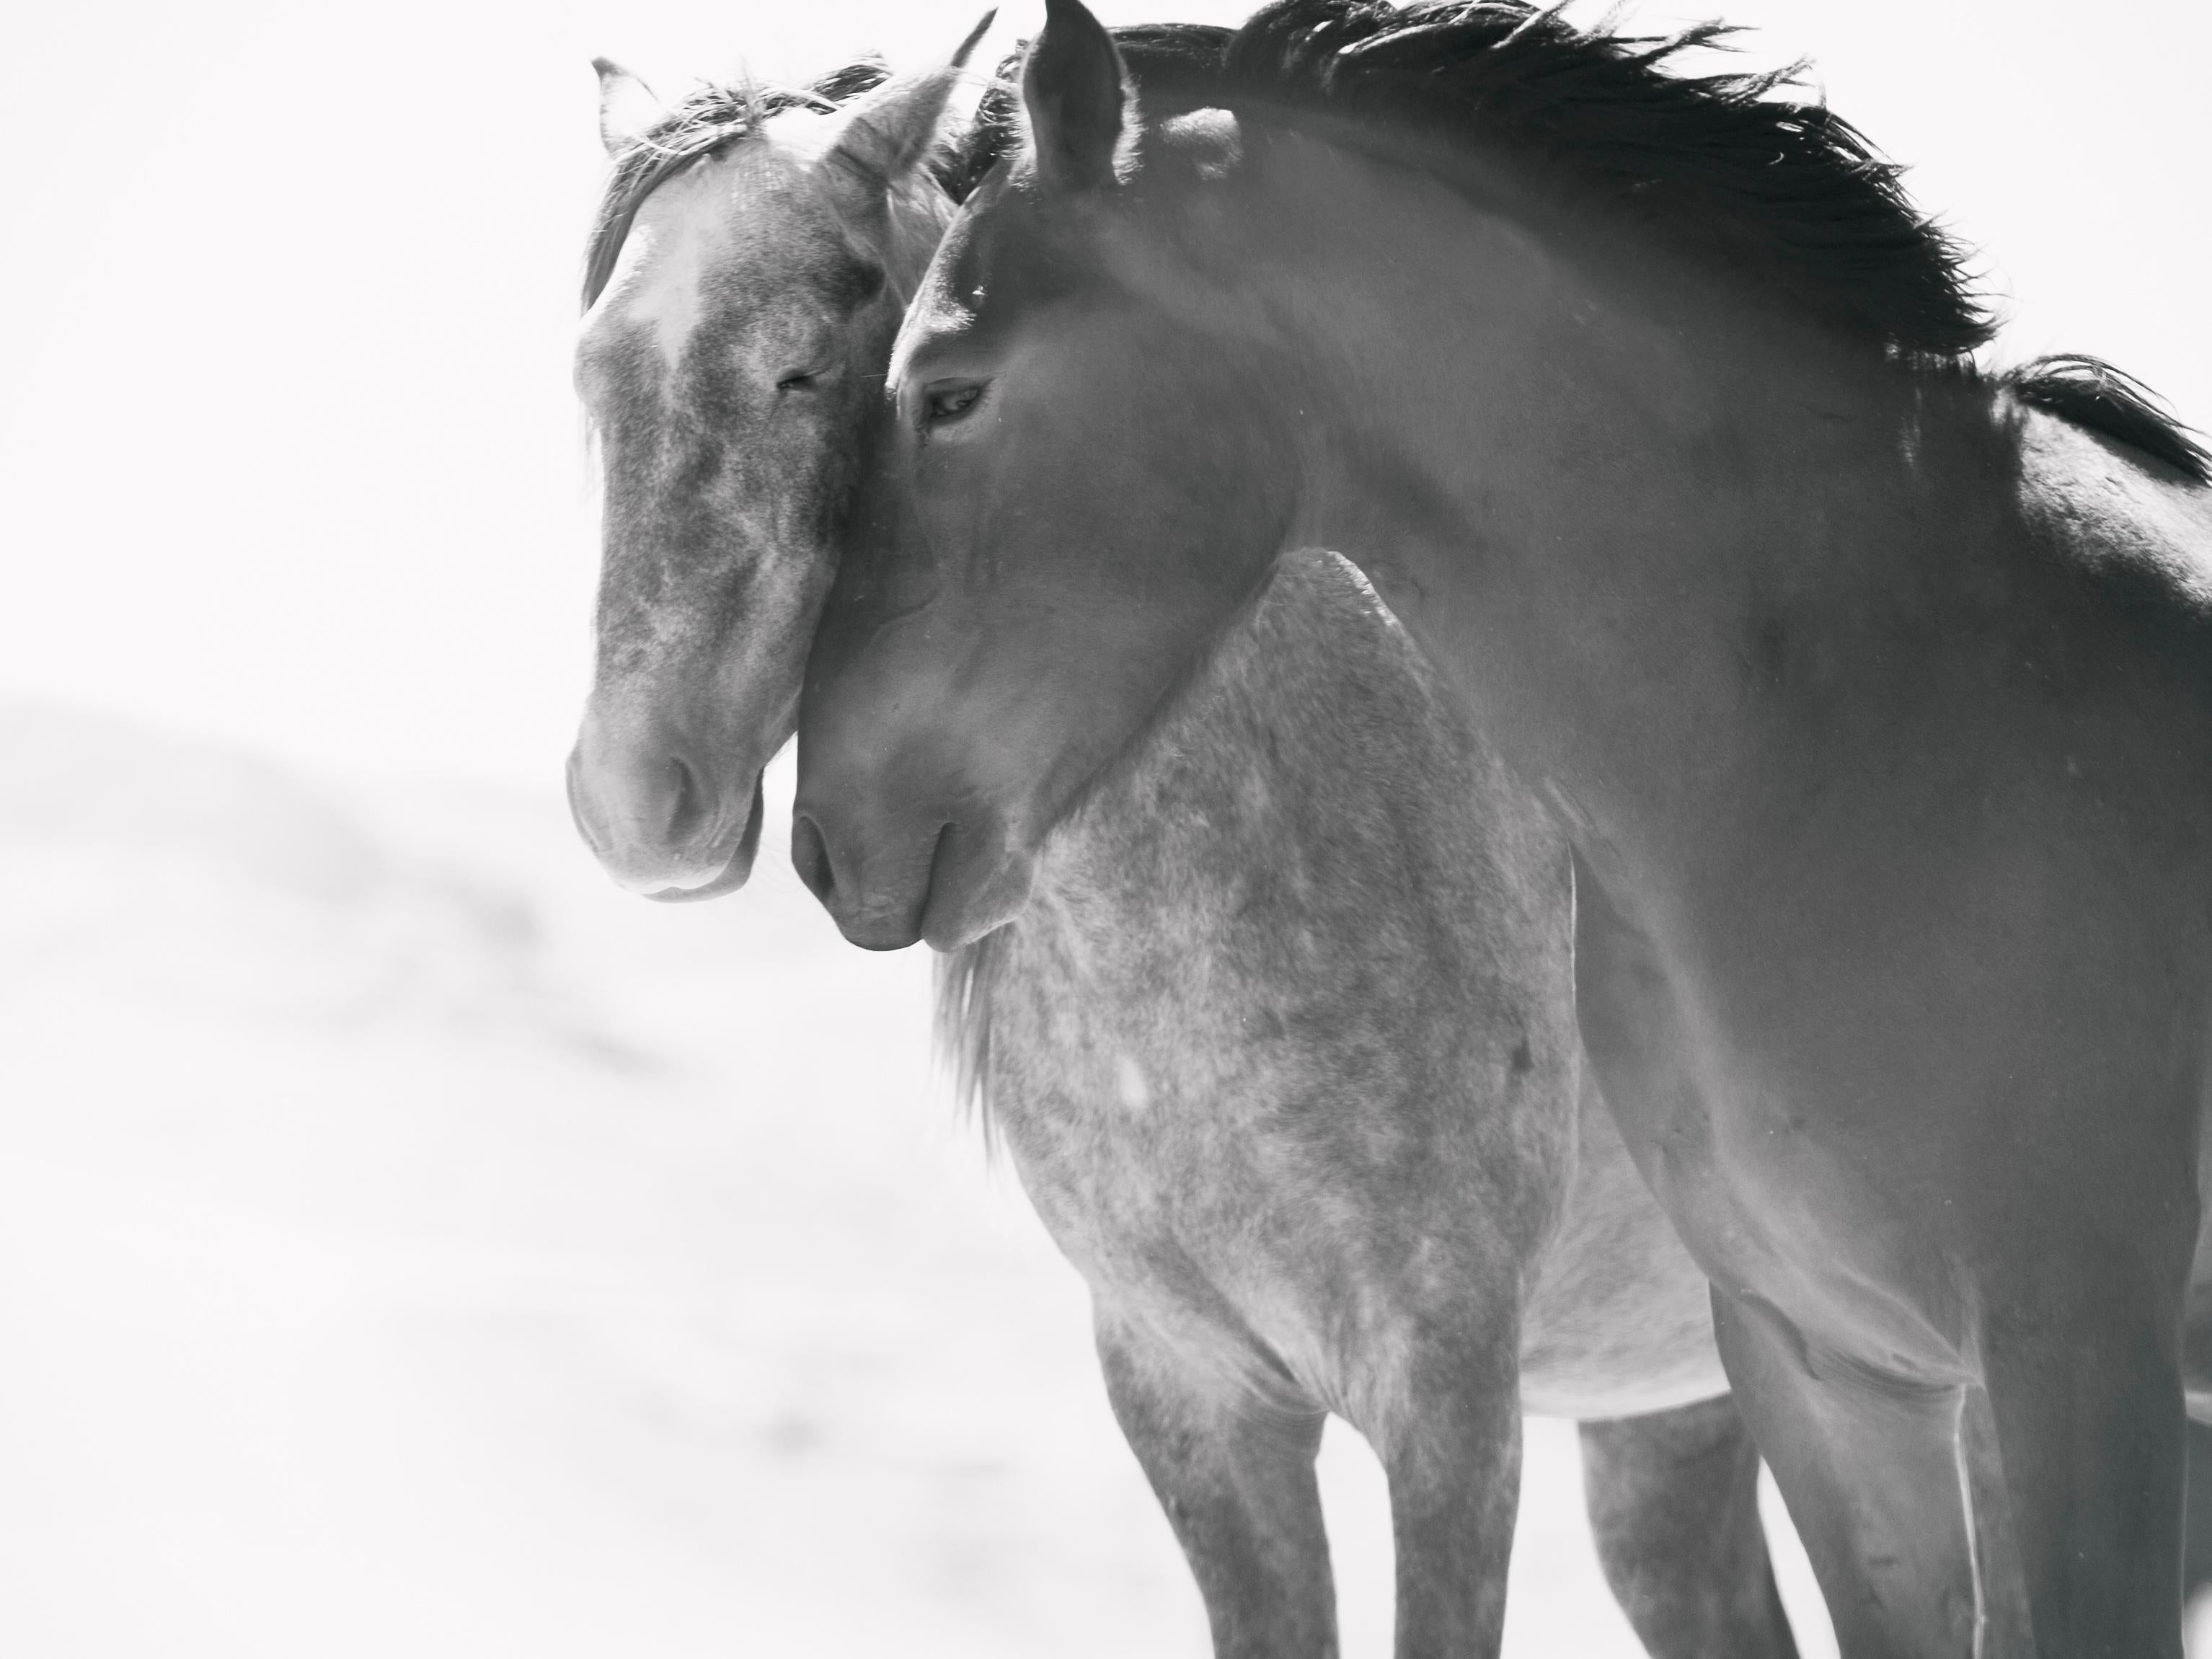 Shane Russeck Black and White Photograph - "Soulmates"  40x60 Photography of Wild Horses Mustangs Photograph Fine Art Print